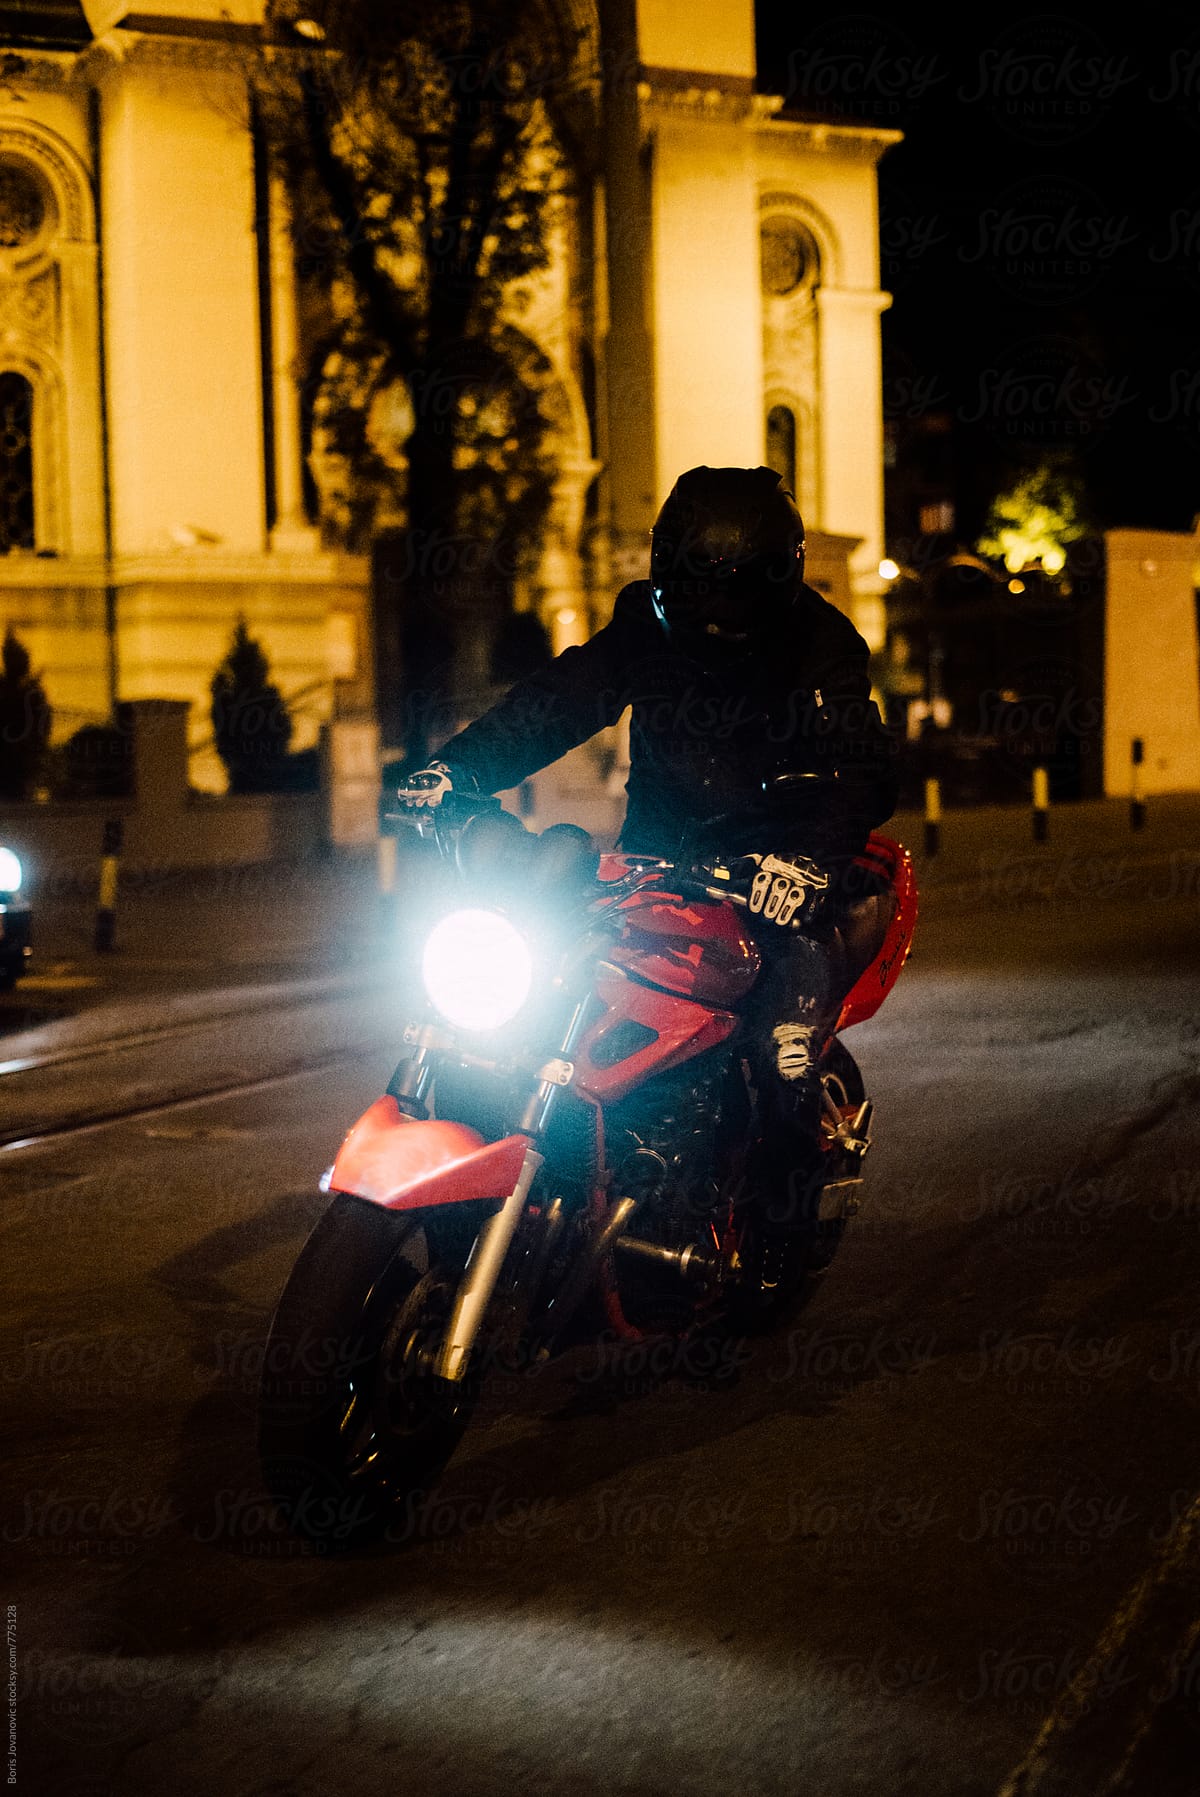 Biker riding a motorcycle on the street at night